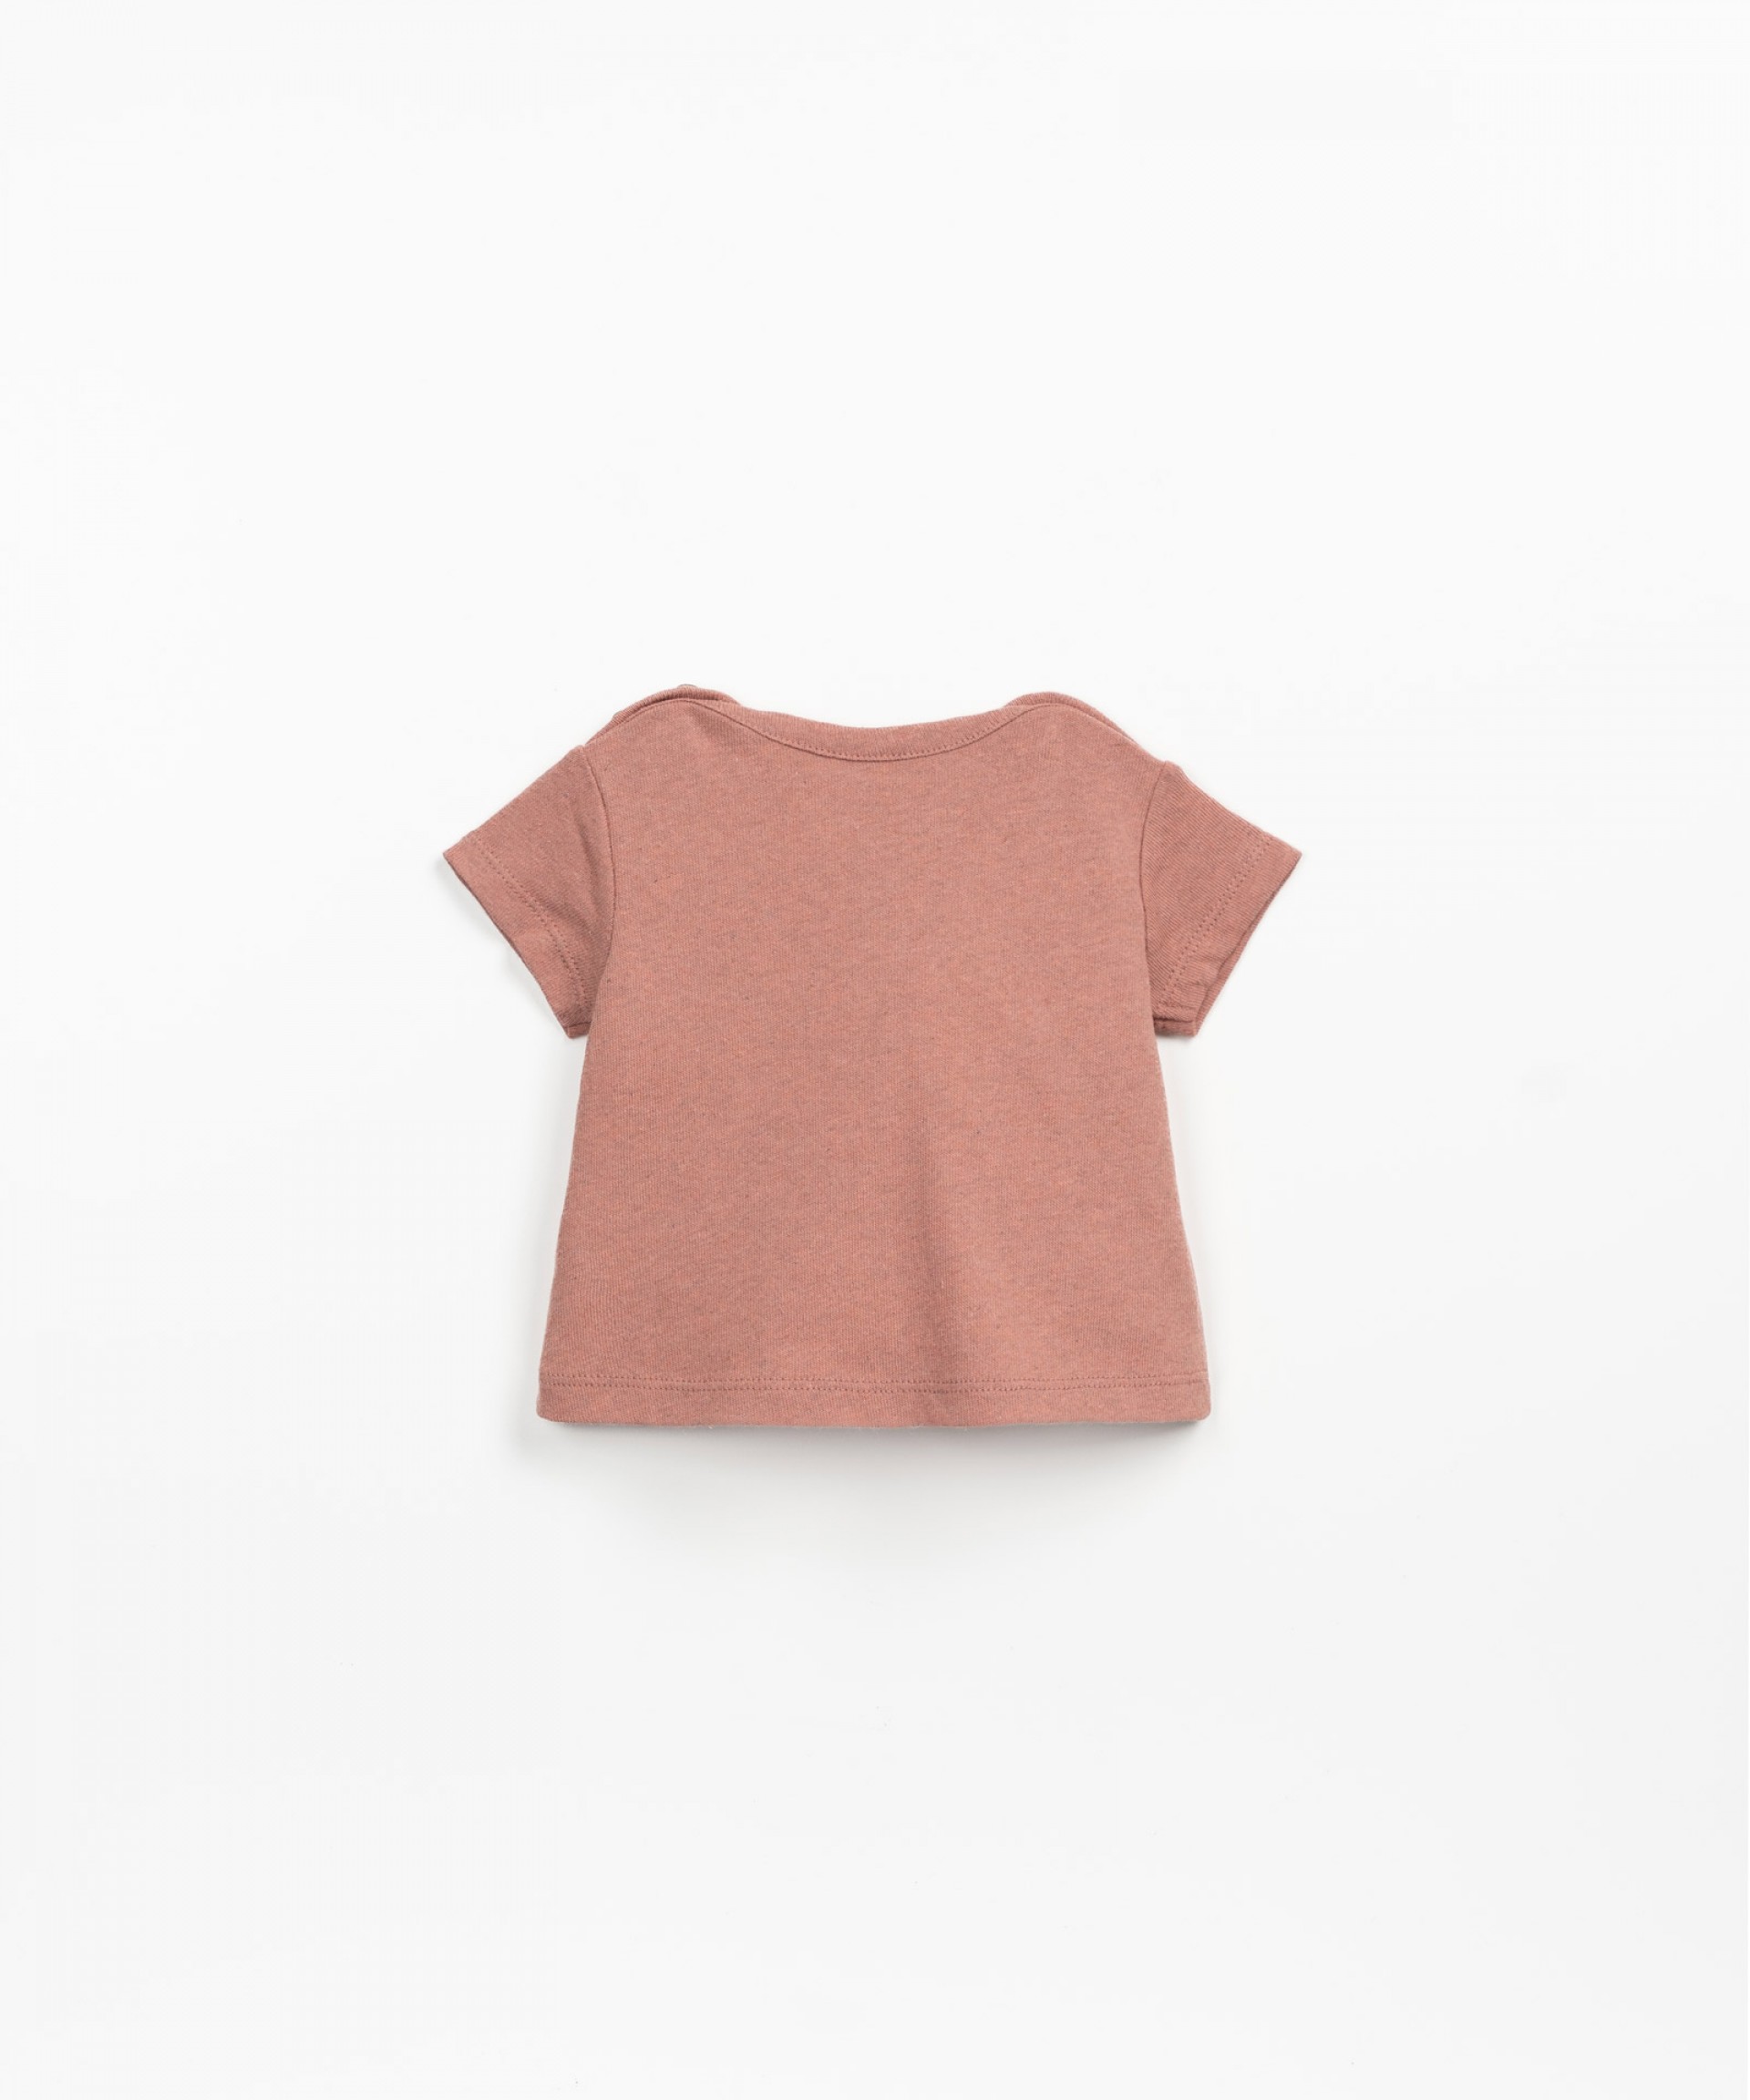 T-shirt with shoulder opening | Textile Art